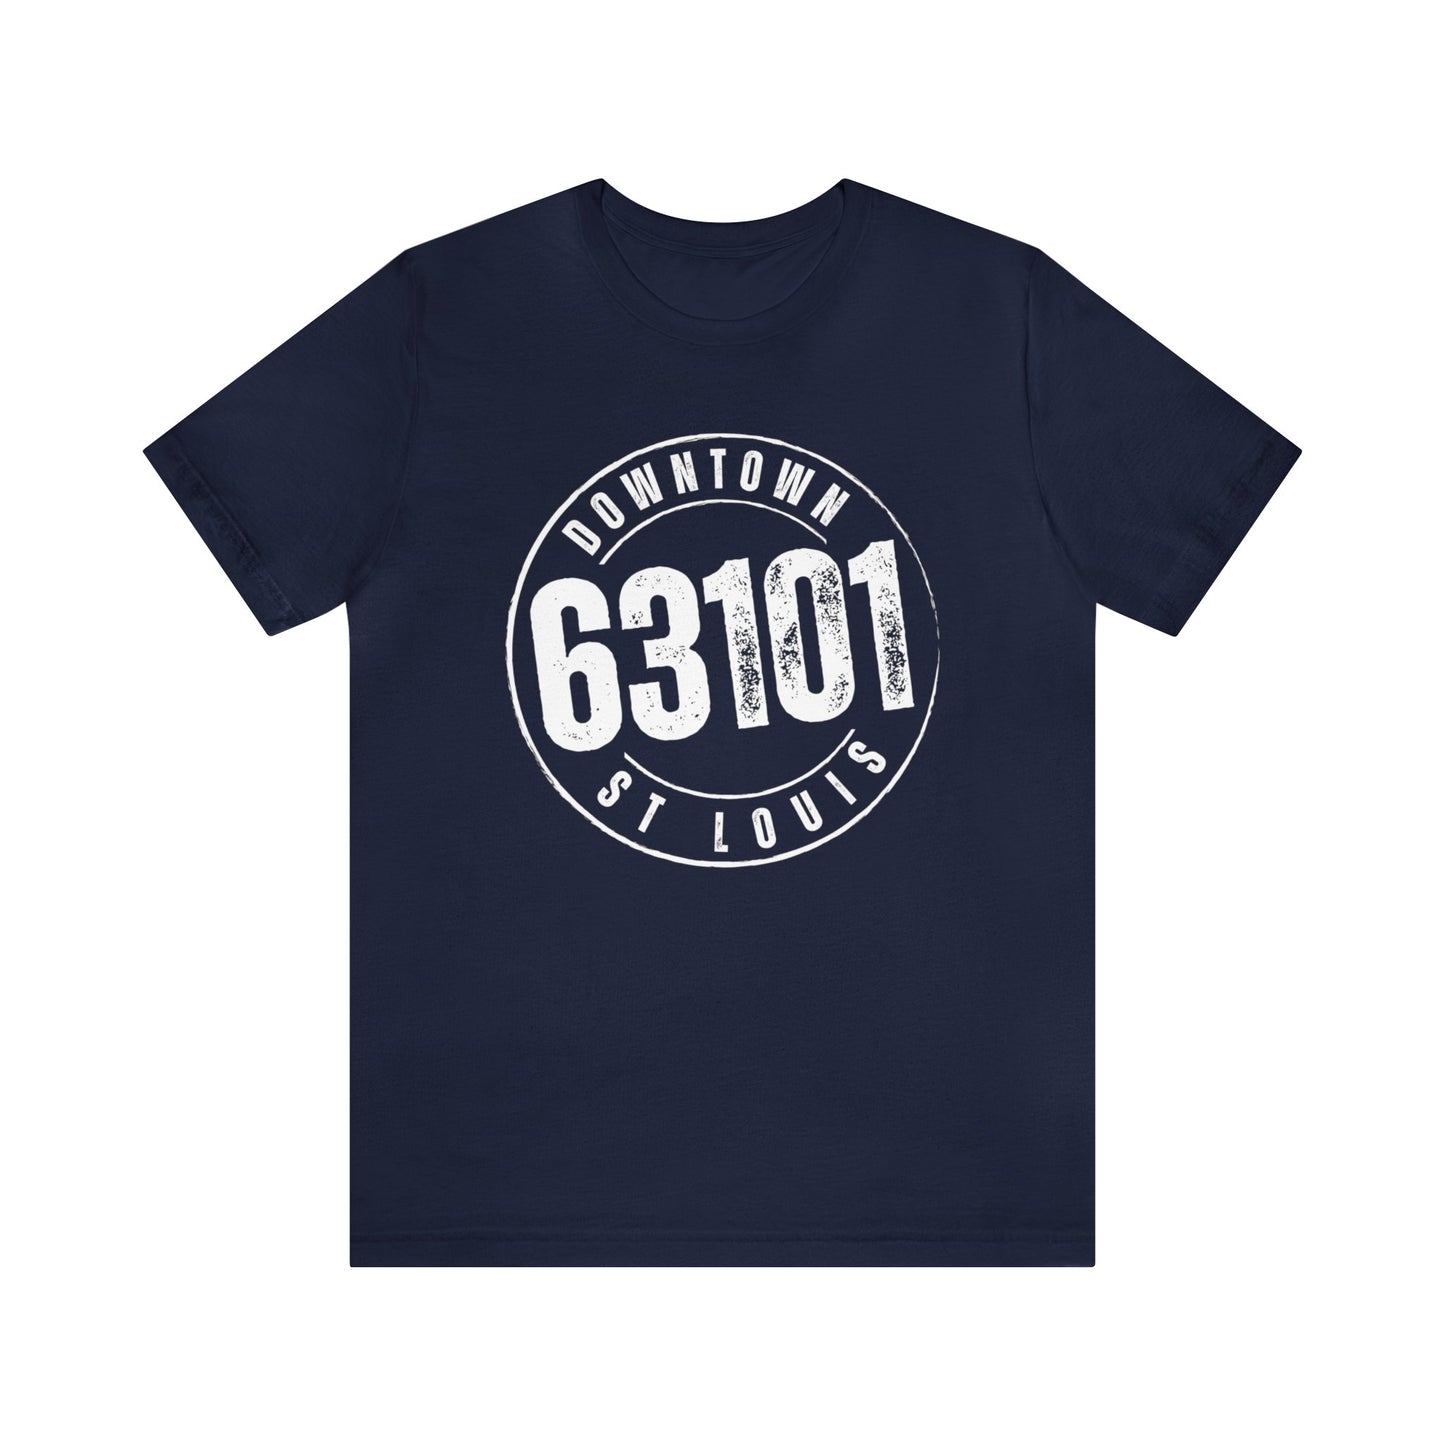 63101 Downtown St. Louis Tee, (White Graphic)